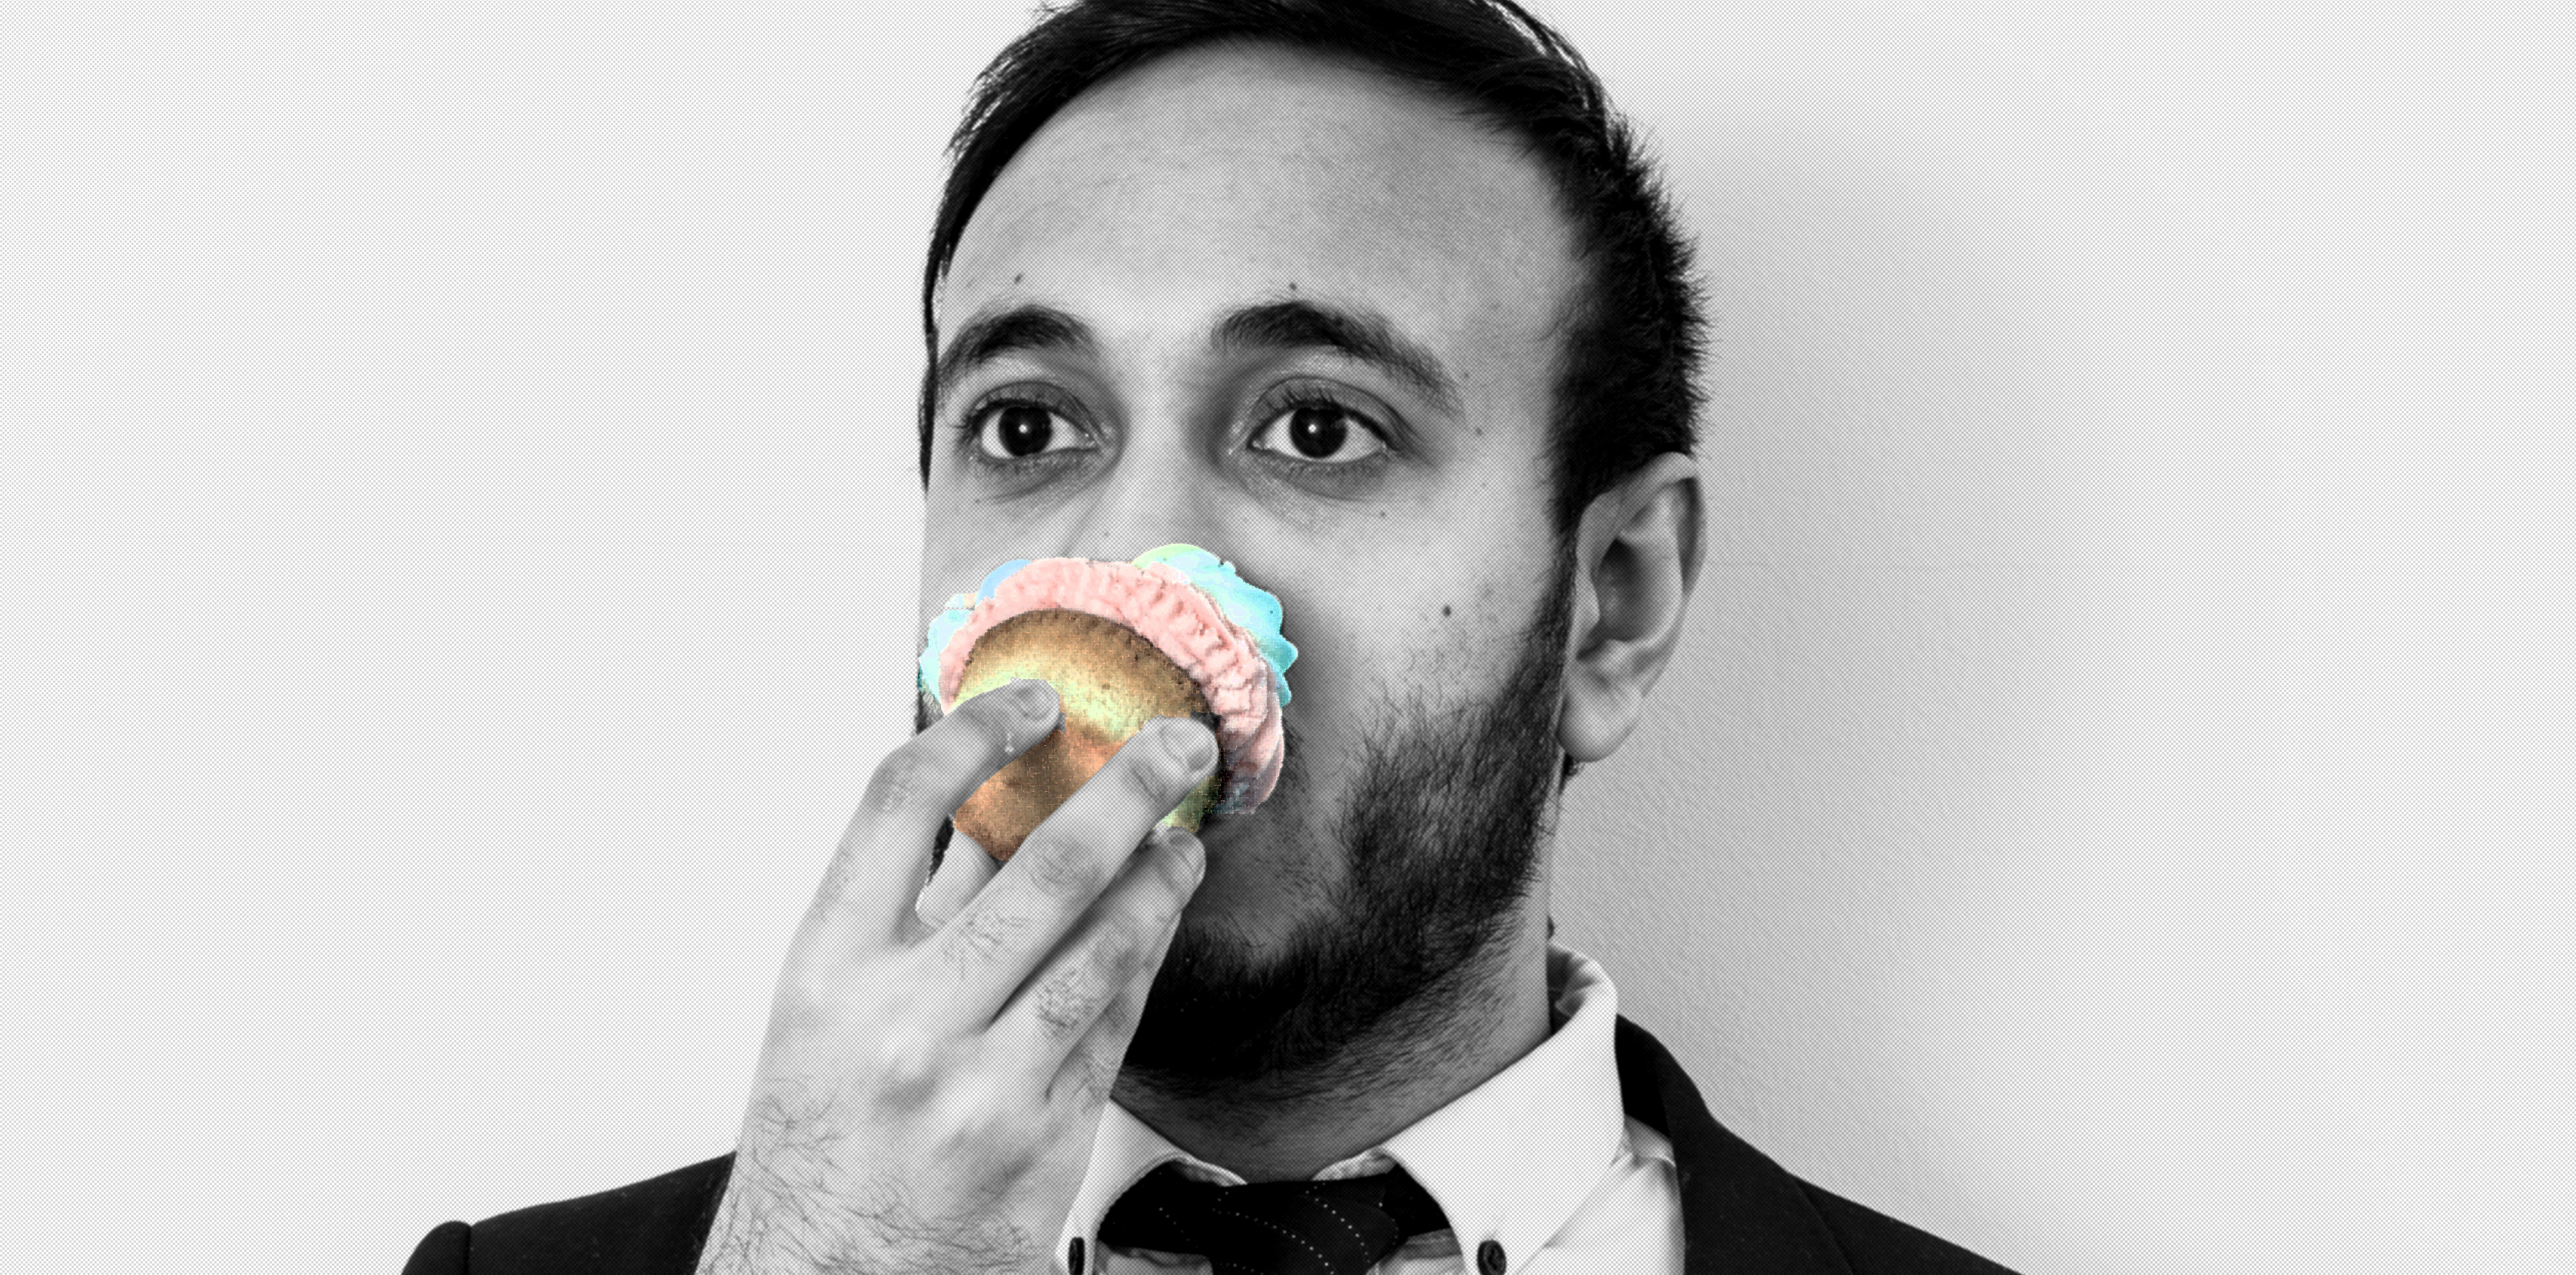 EDINBURGH COMEDY AWARDS BEST NEWCOMER NOMINEE BILAL ZAFAR ANNOUNCES HIS FIRST NATIONWIDE TOUR WITH ‘CAKES’ INCLUDING A SIX NIGHT RUN AT LONDON’S SOHO THEATRE